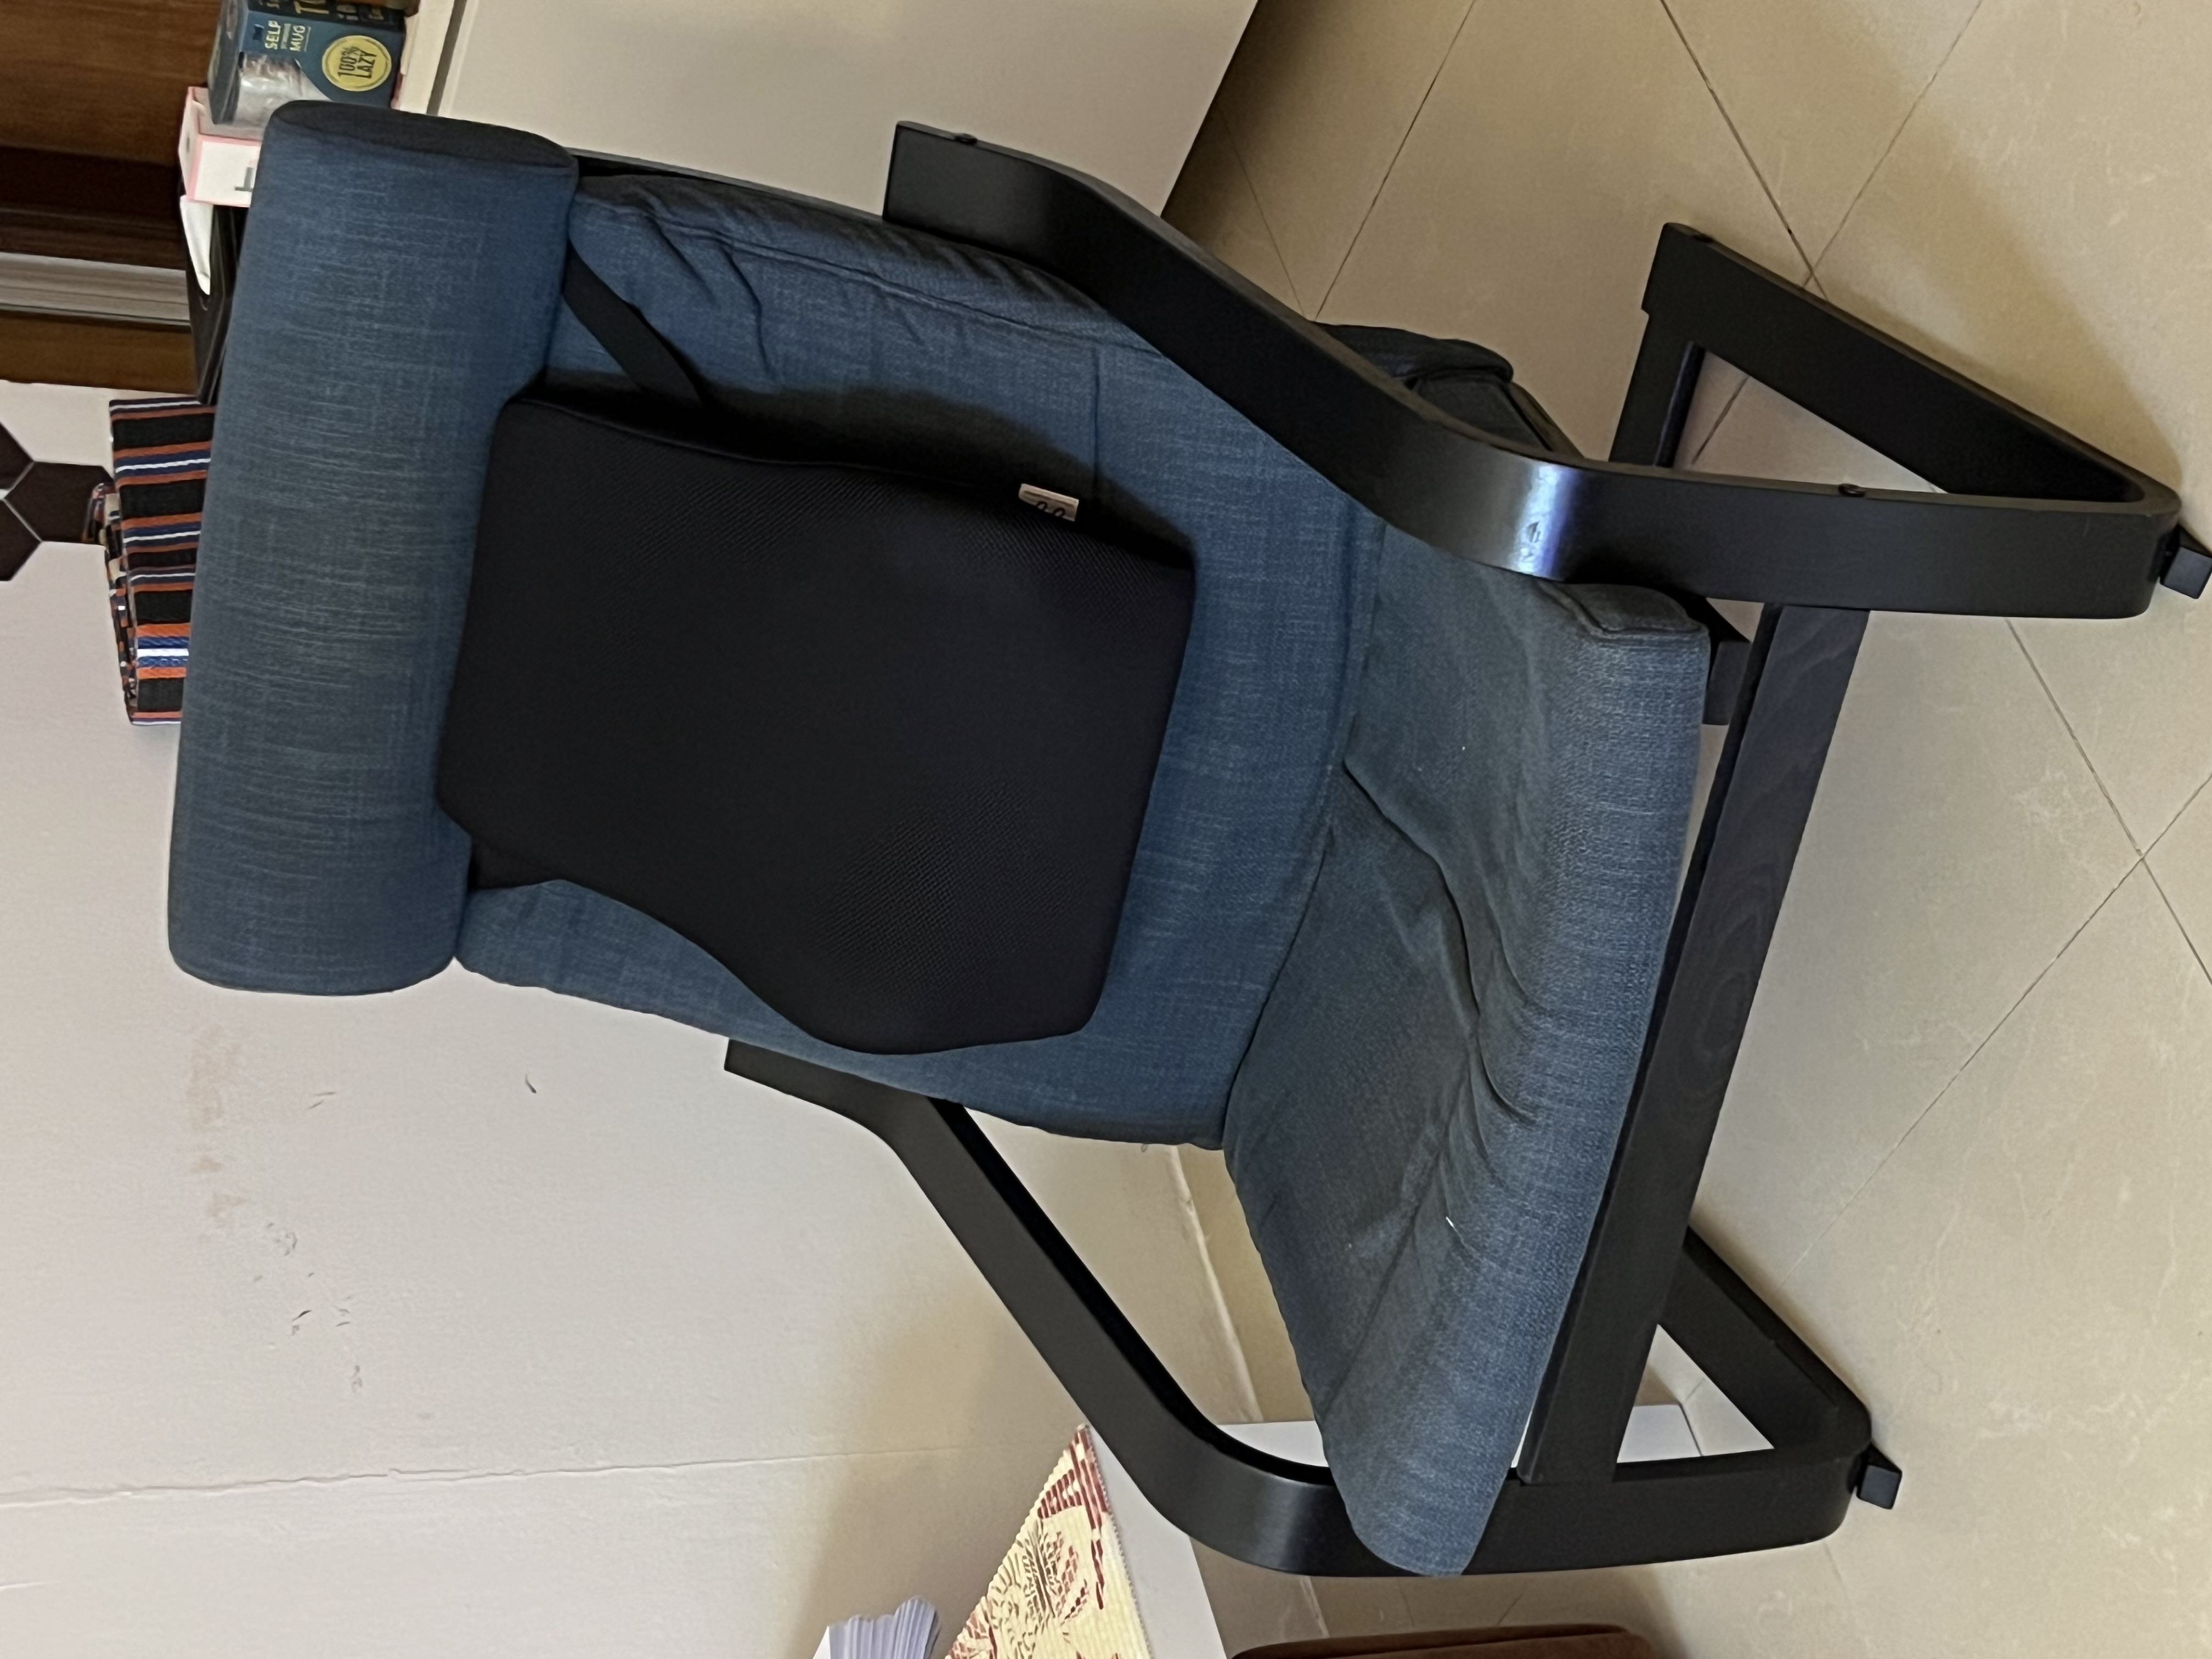 Used POANG armchair from ikea for sale